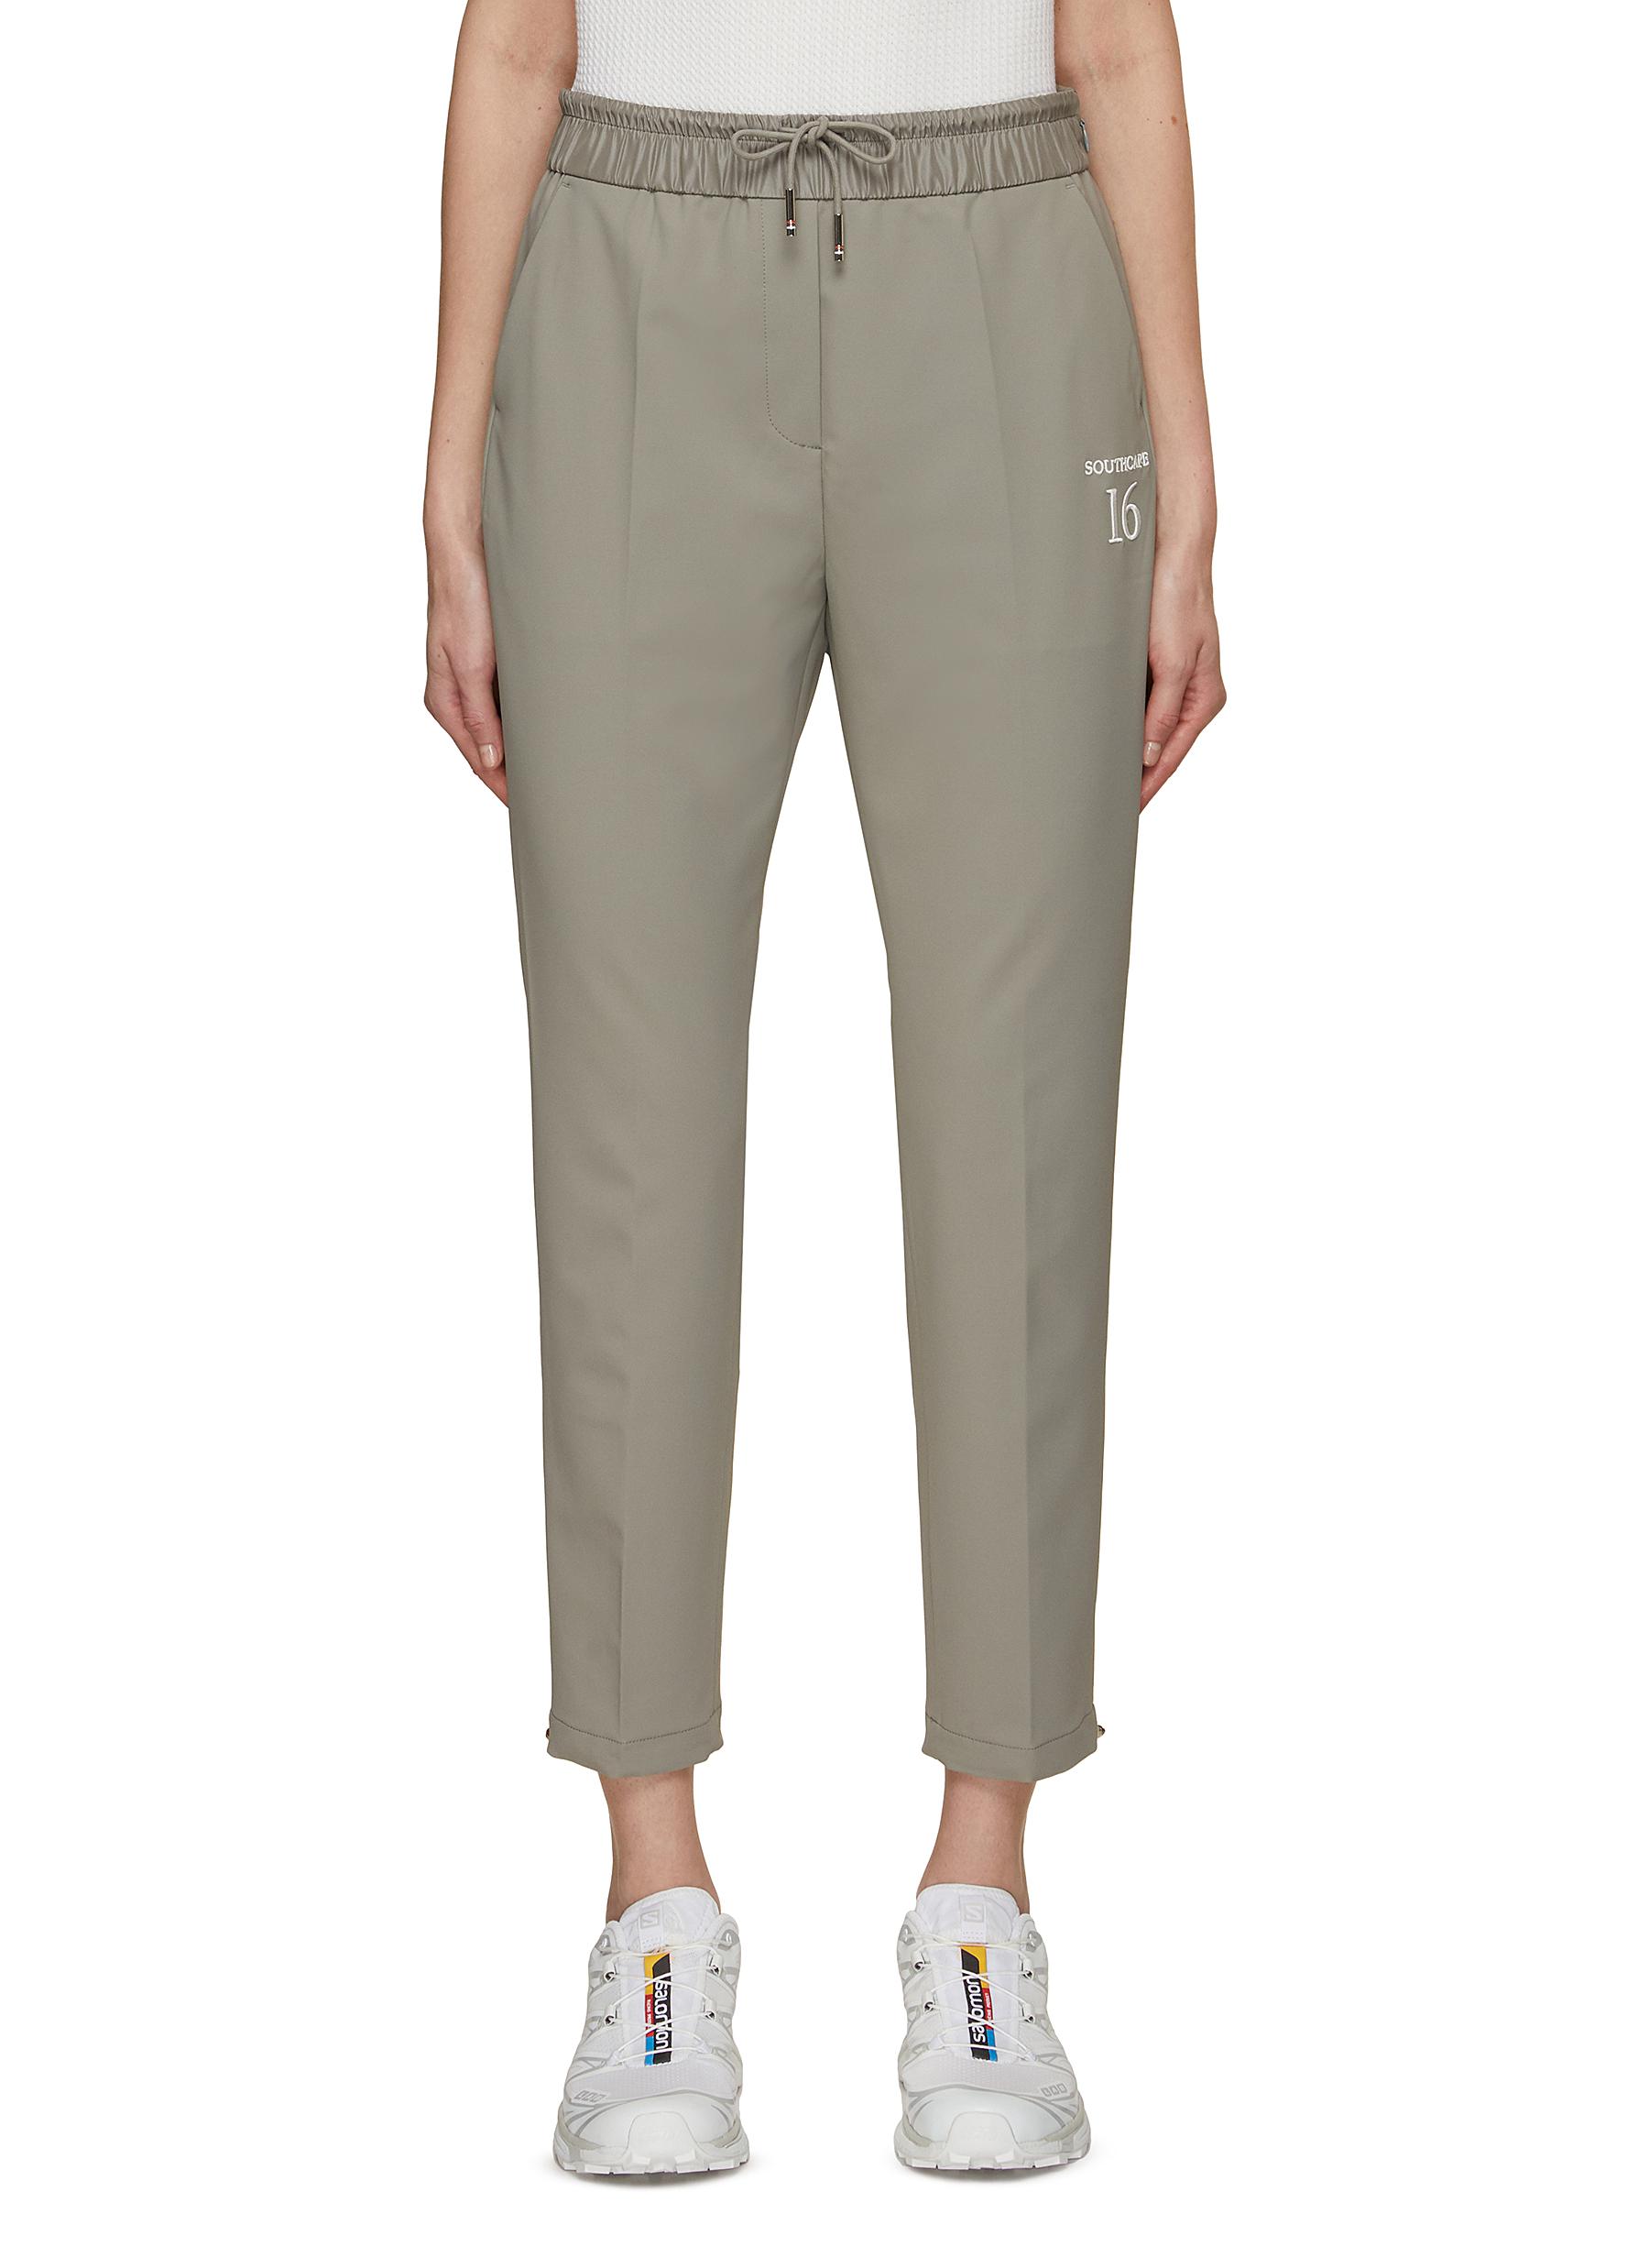 SOUTHCAPE, Tapered Cropped Joggers, Women